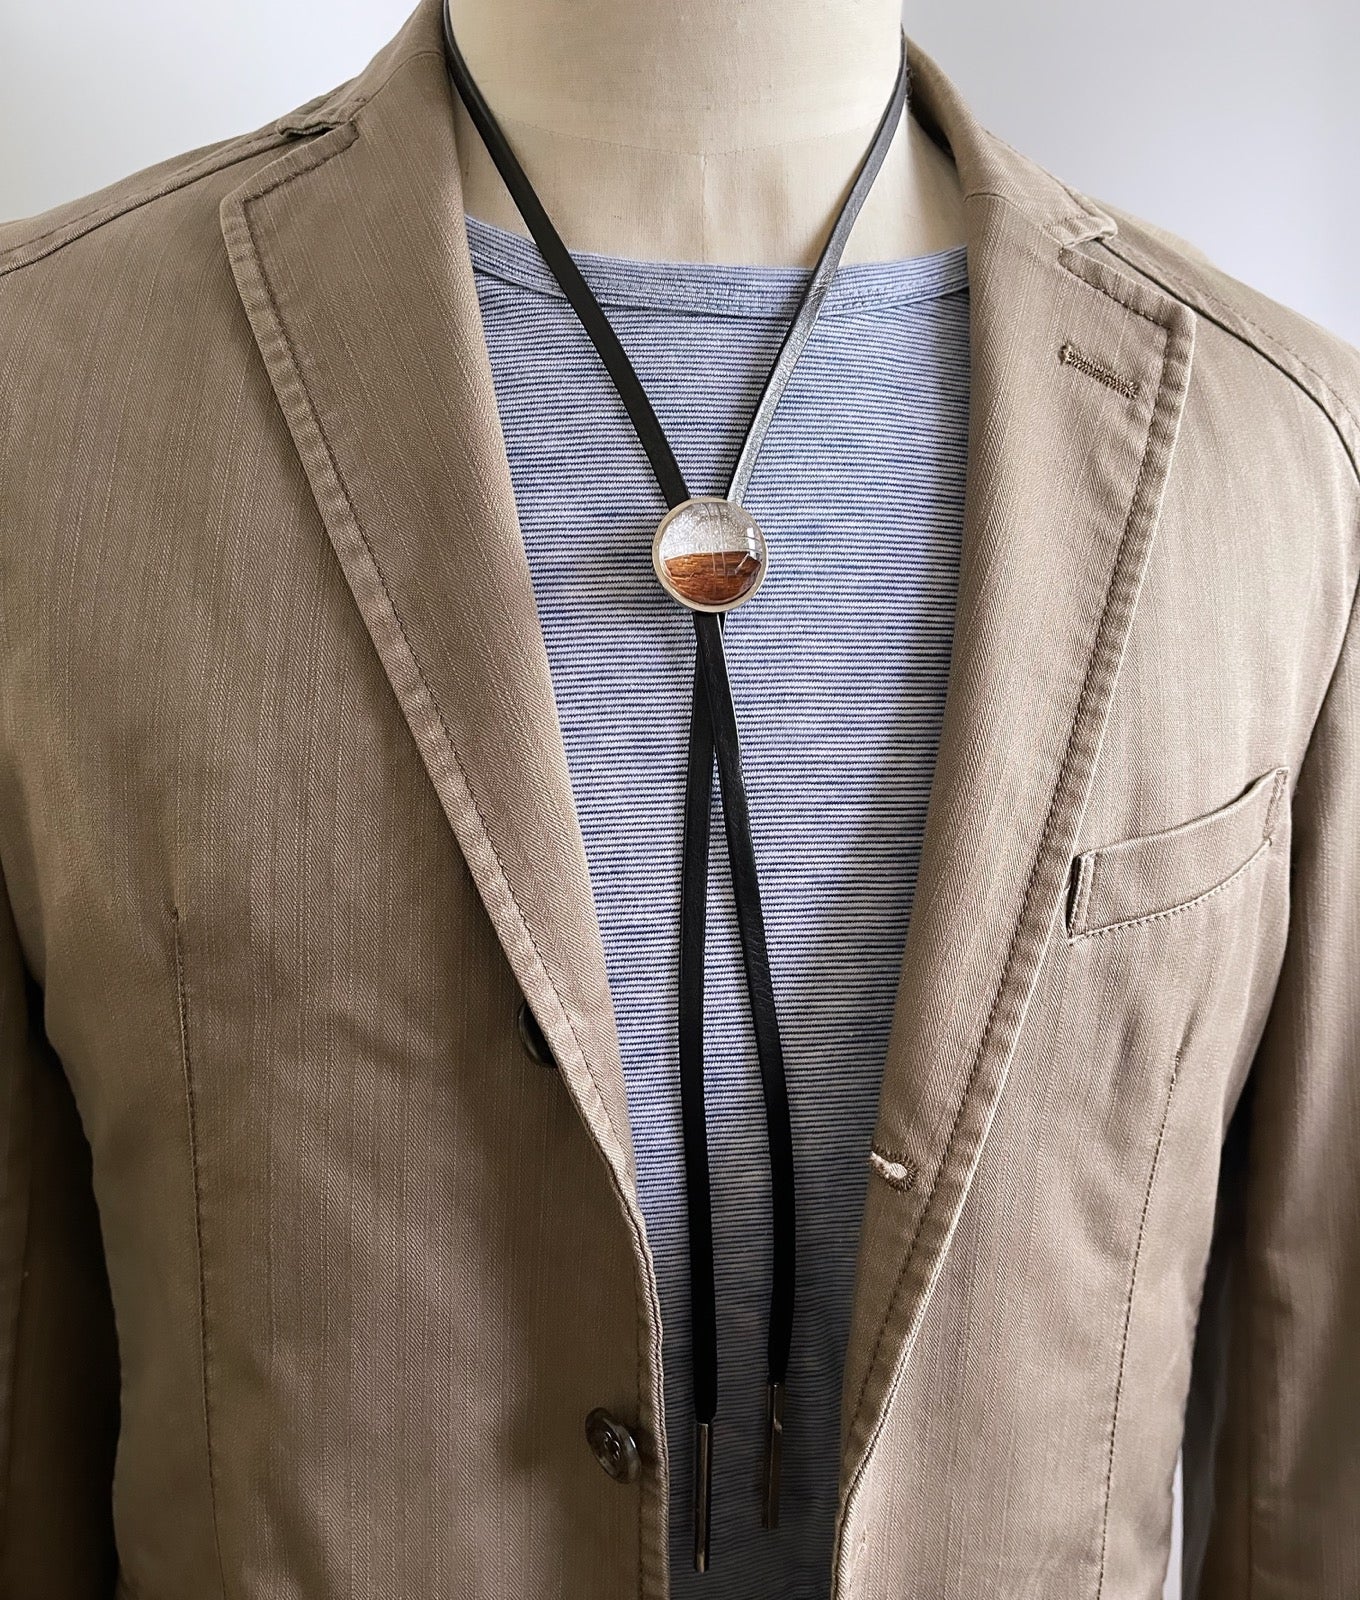 Leather Strap Bolo Tie Silver Lame Wood TAMARUSAN